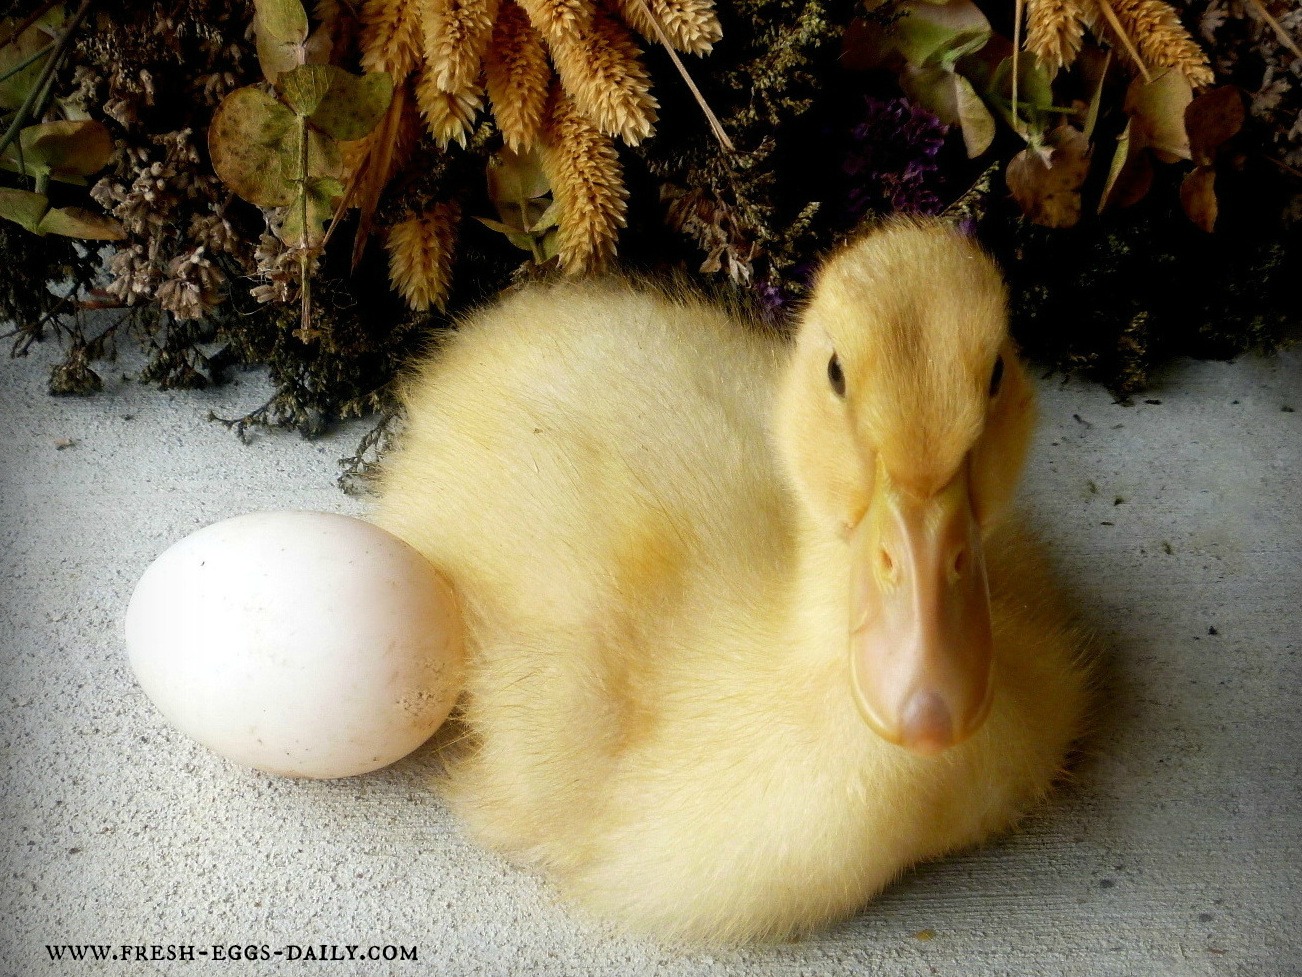 Beginners Guide to Raising Ducklings - Fresh Eggs Daily® with Lisa Steele